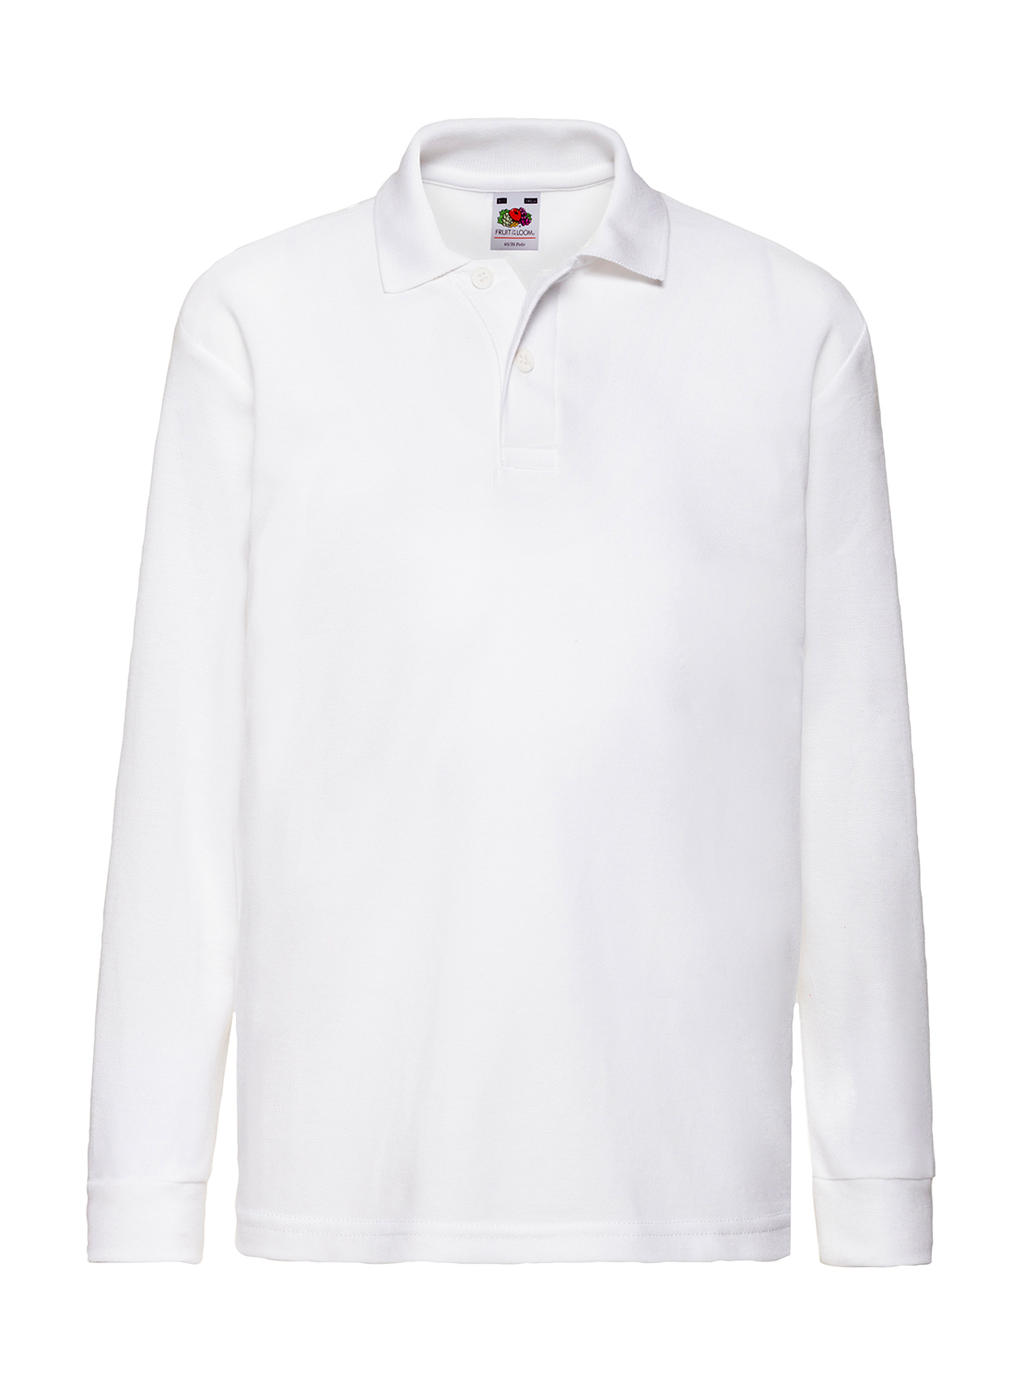  Kids 65/35 Long Sleeve Polo in Farbe White